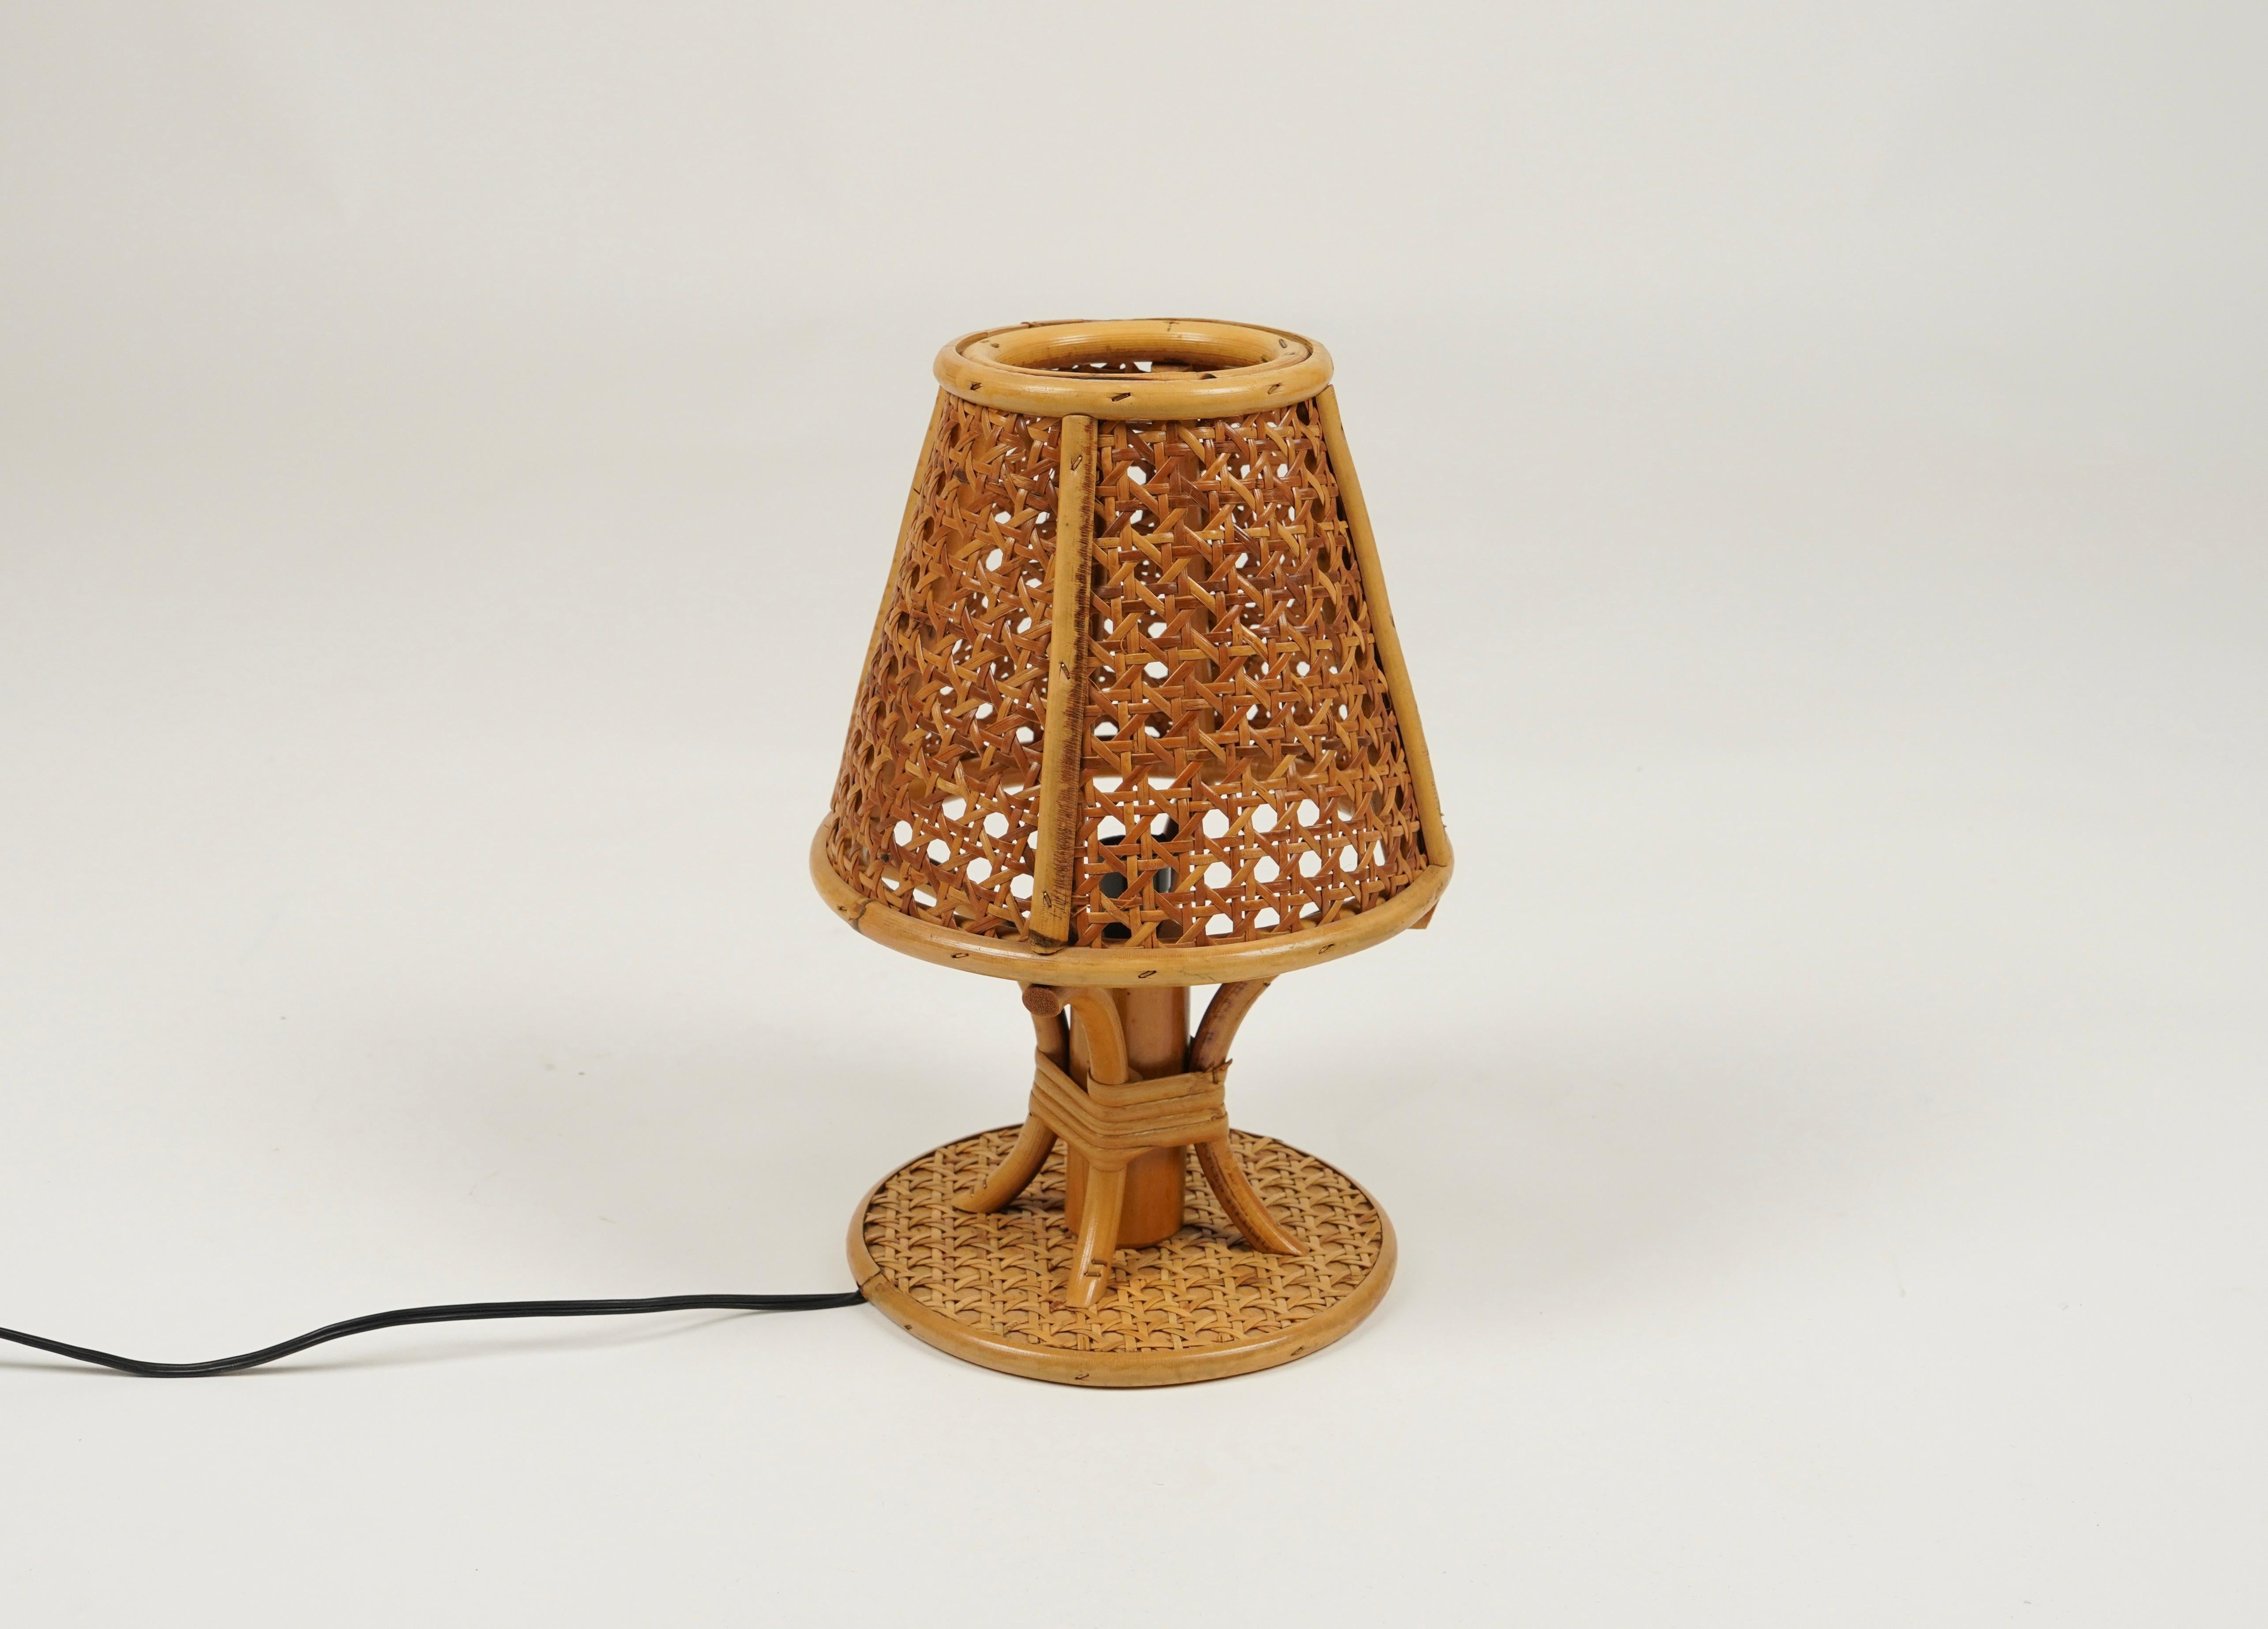 Midcentury Rattan and Wicker Table Lamp Louis Sognot Style, Italy, circa 1970s For Sale 2